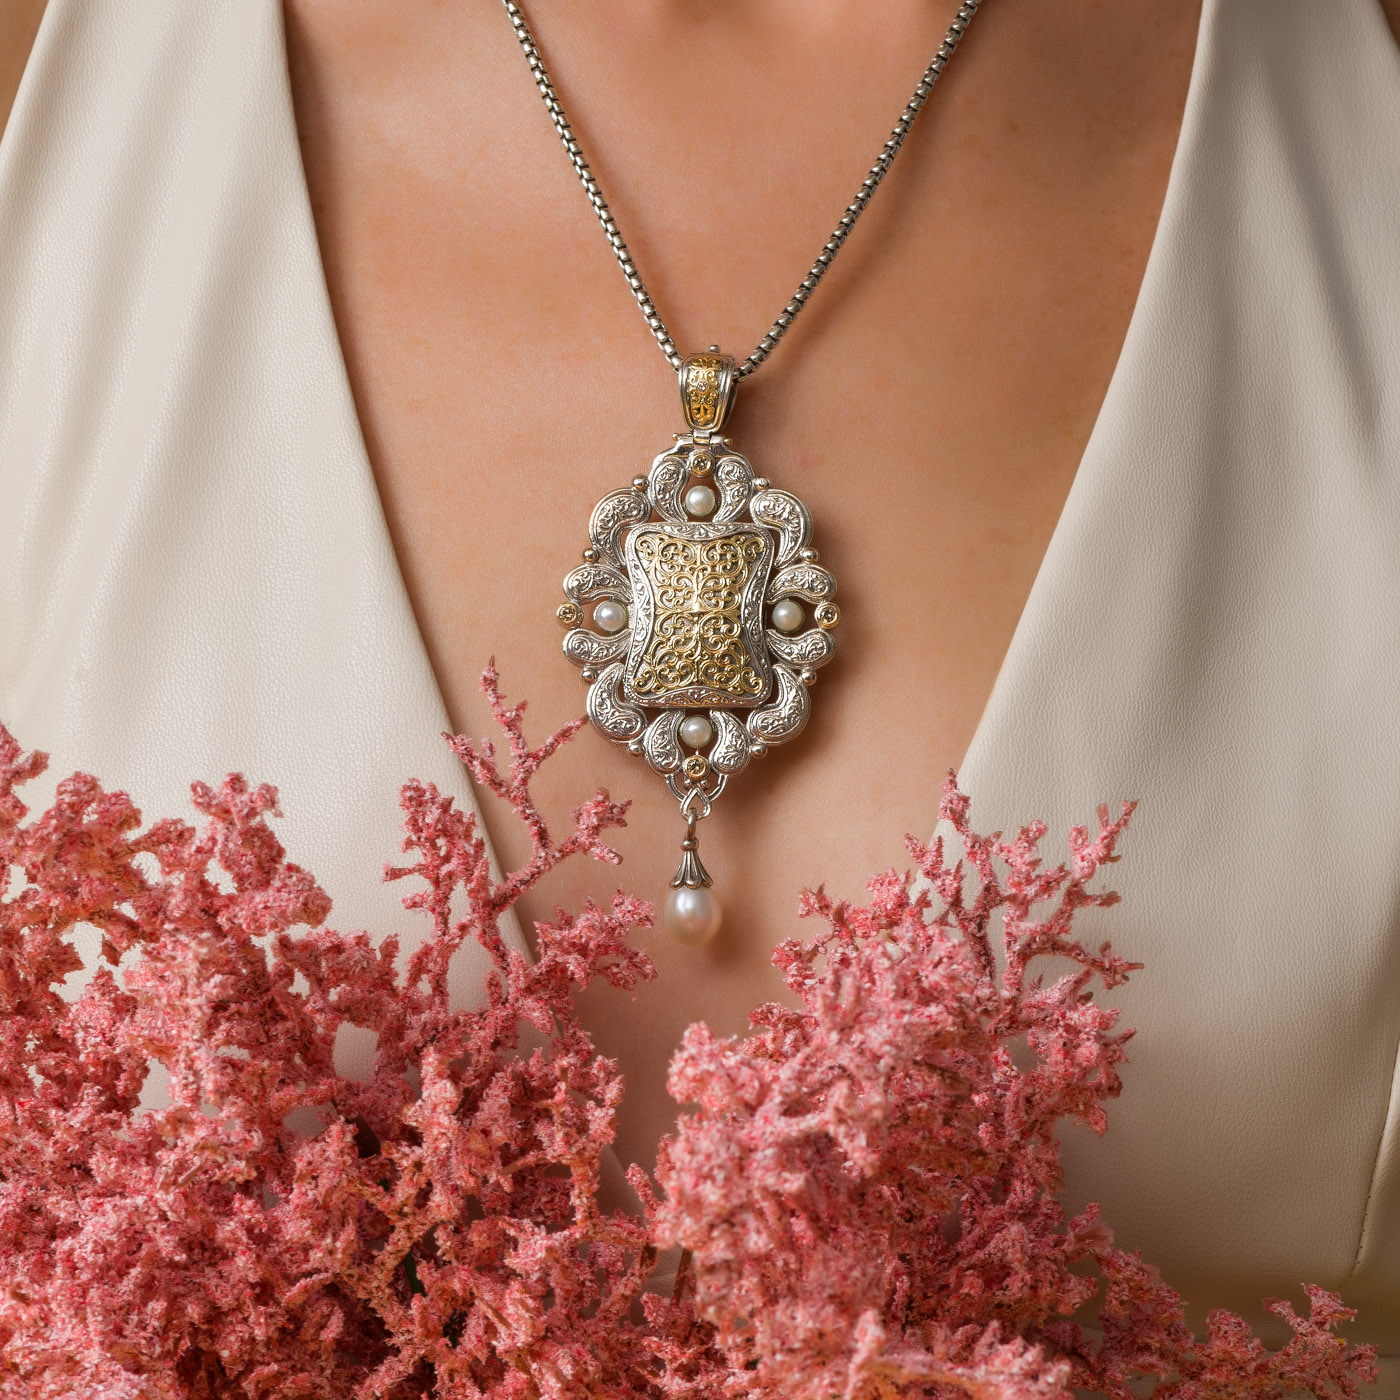 Mediterranean pendant, secret locket in 18K Gold and Sterling Silver with Diamonds